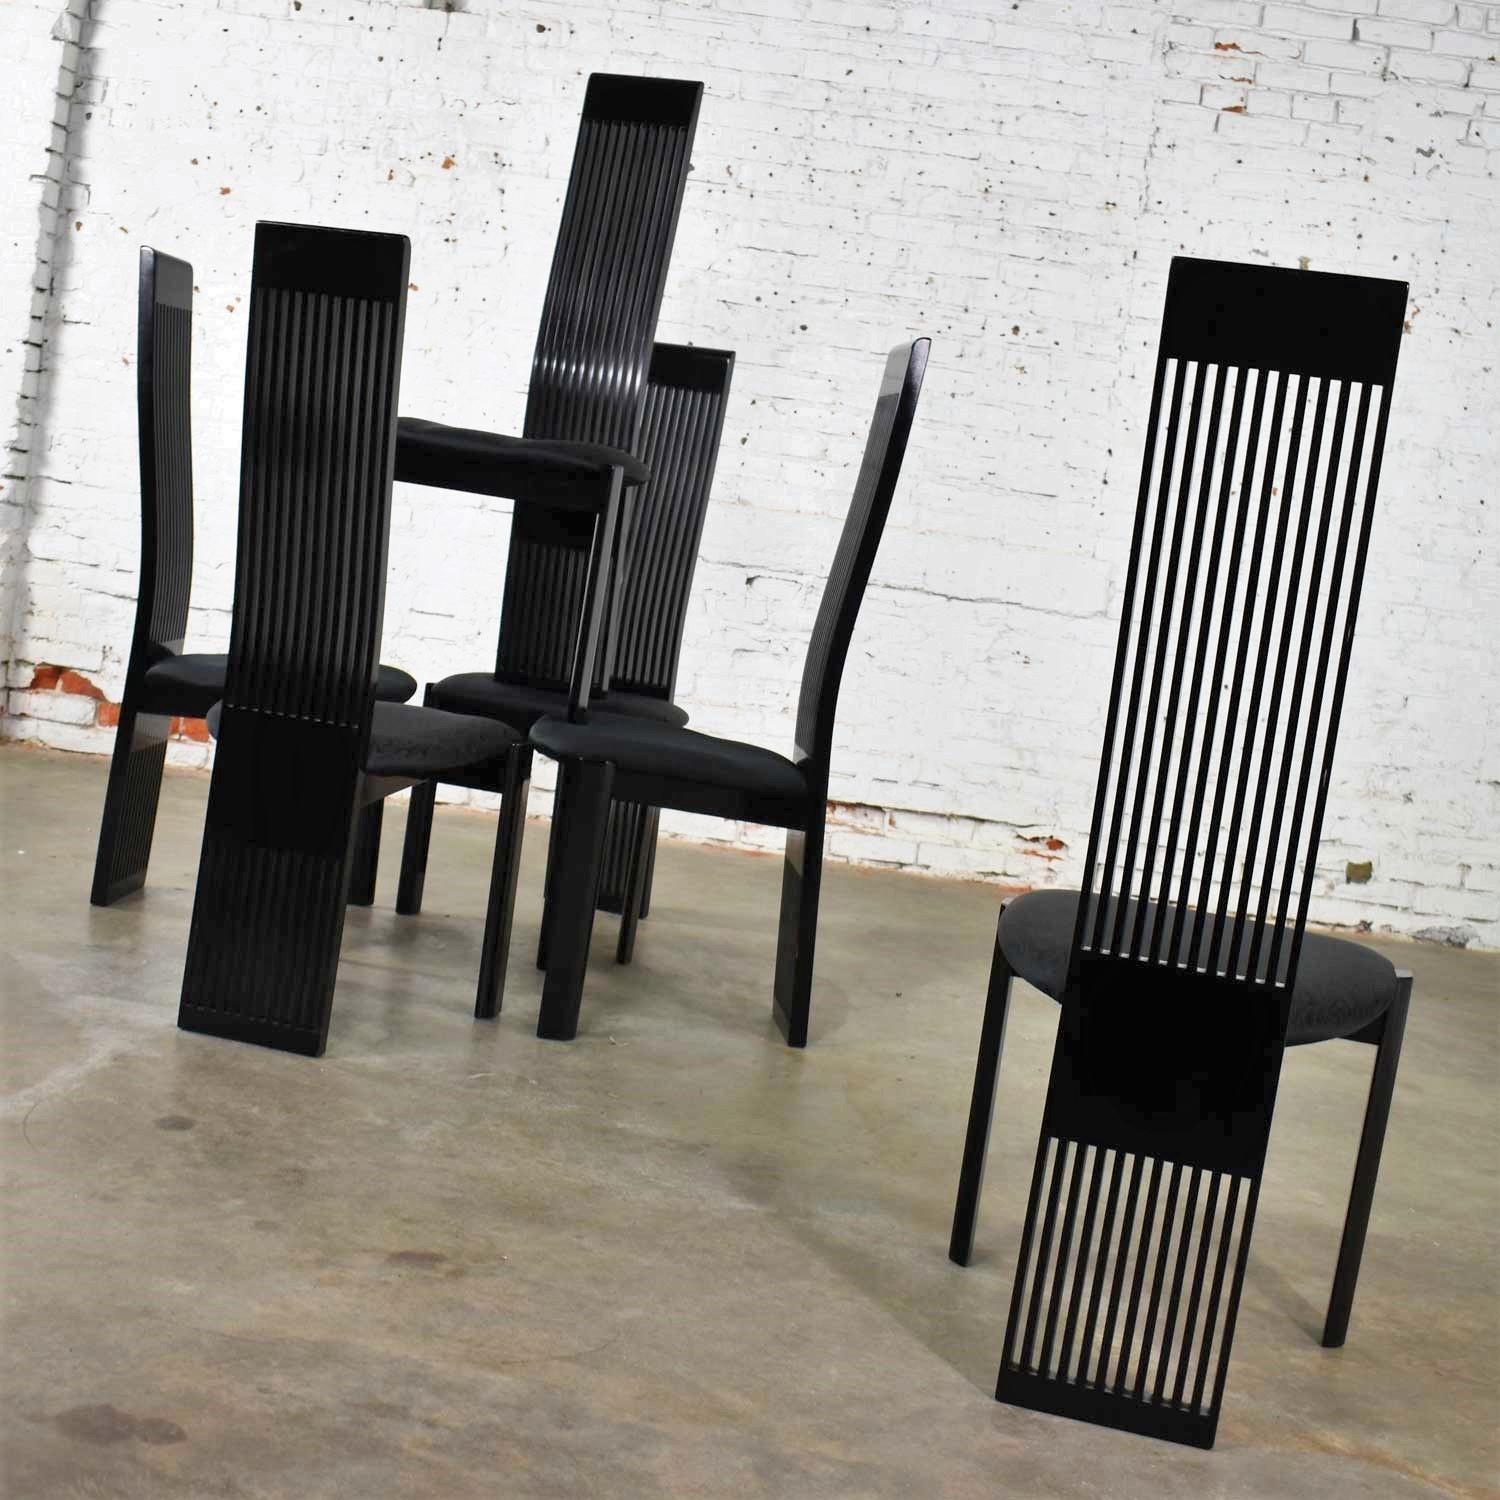 Six Tripod Postmodern Black Lacquer Dining Chairs by Pietro Costantini Made in 1